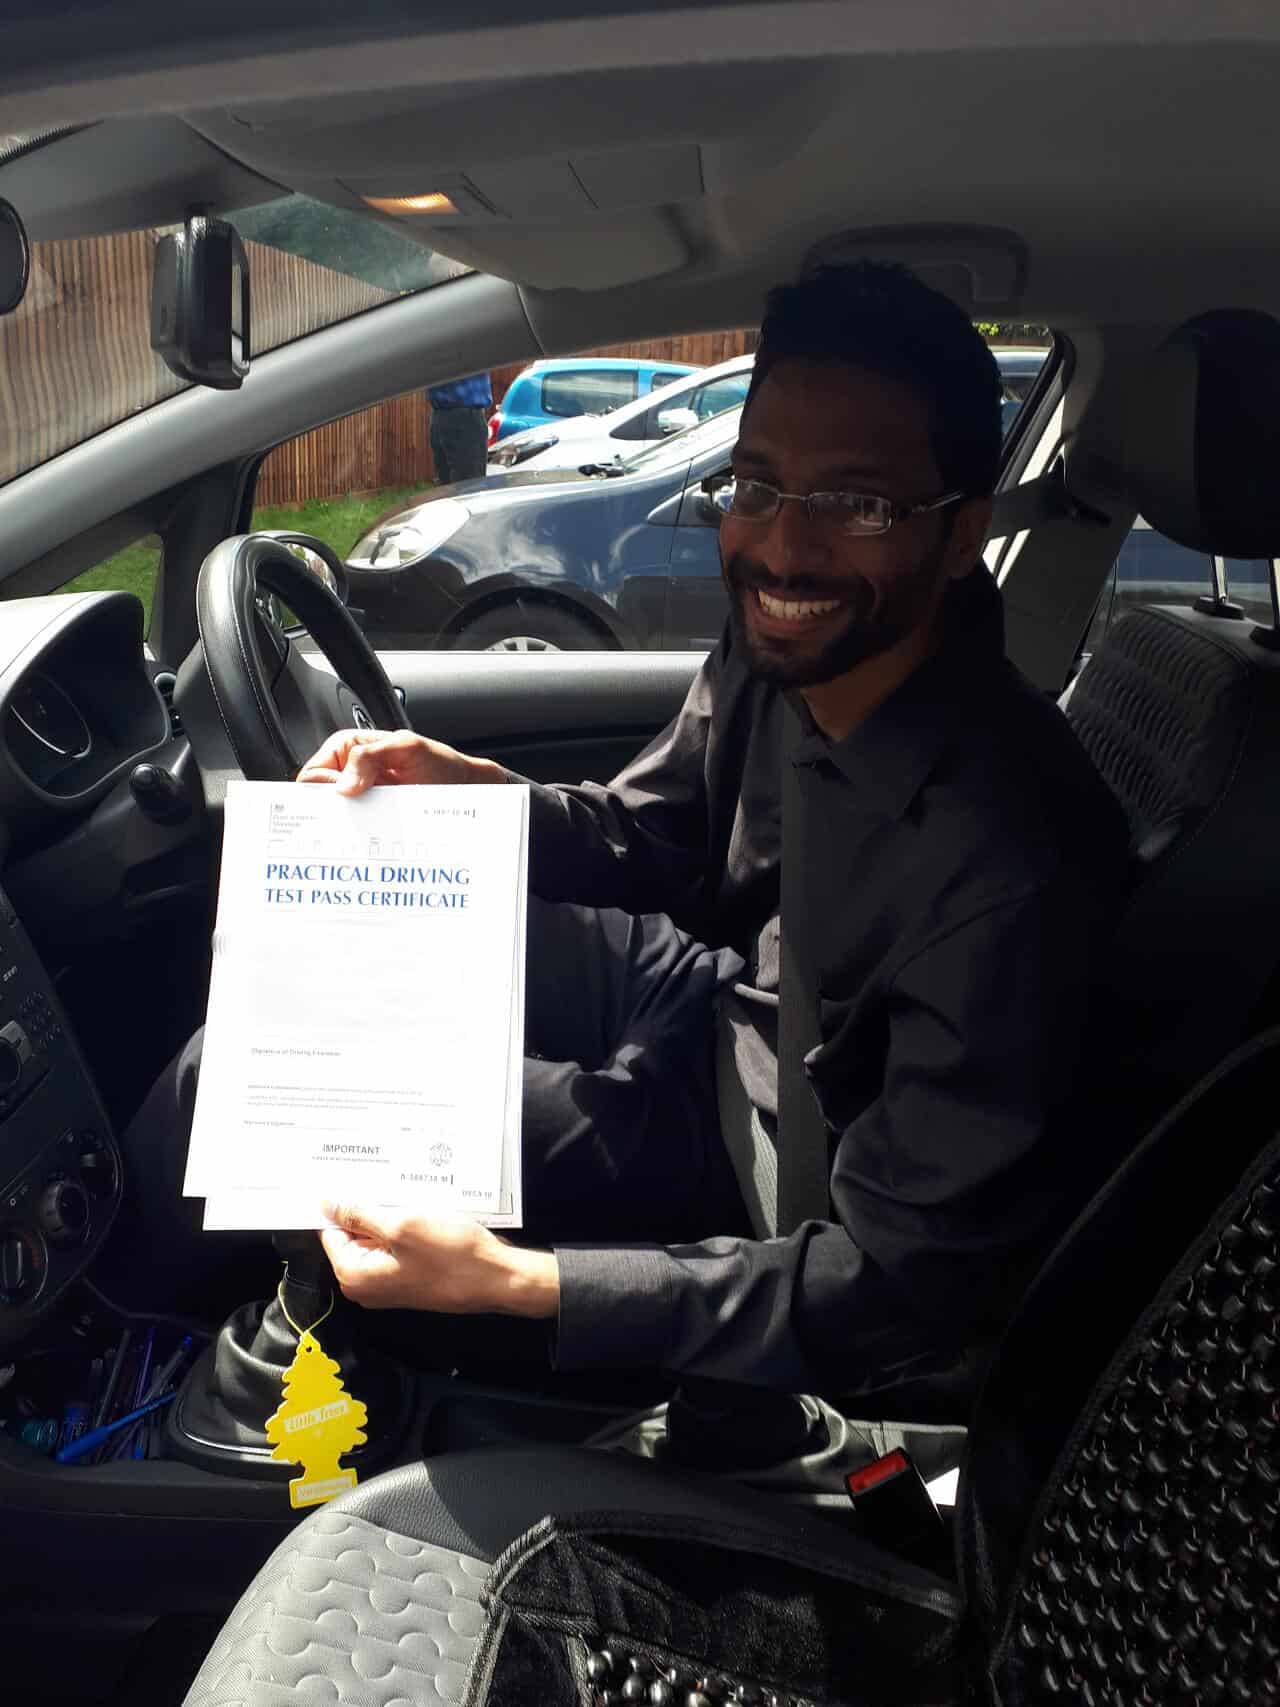 Congratulations to Arun, London NW9, on passing your driving test with an intensive driving course and the help of Michael from Intensive Courses